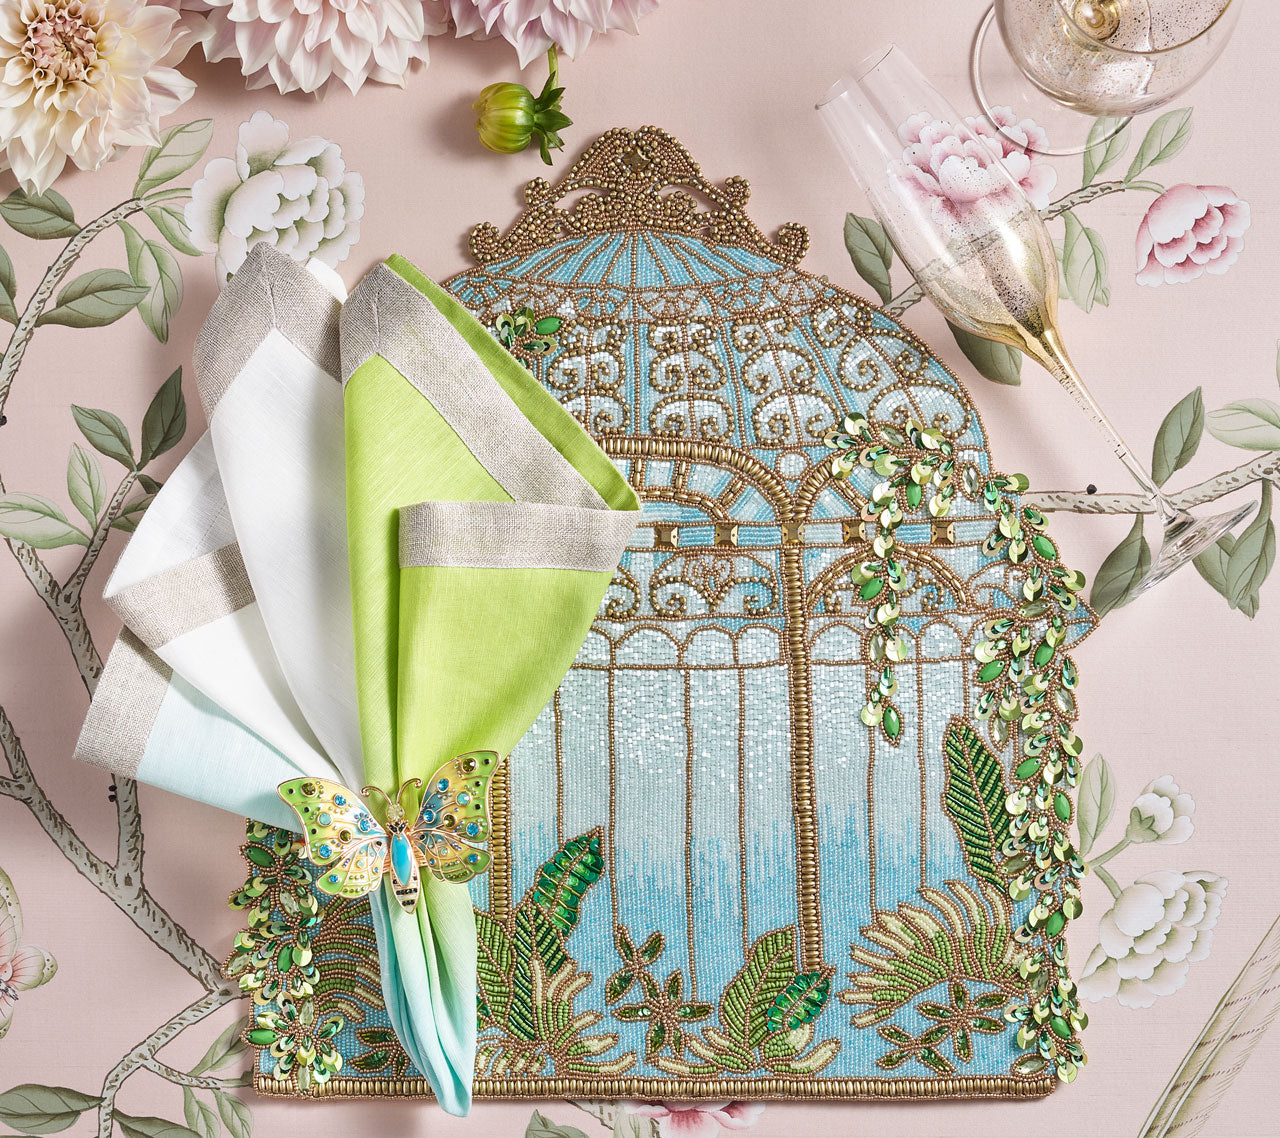 Beaded Arbor Placemat with a blue-green ombre napkin  held by a butterfly napkin ring, placed on the side